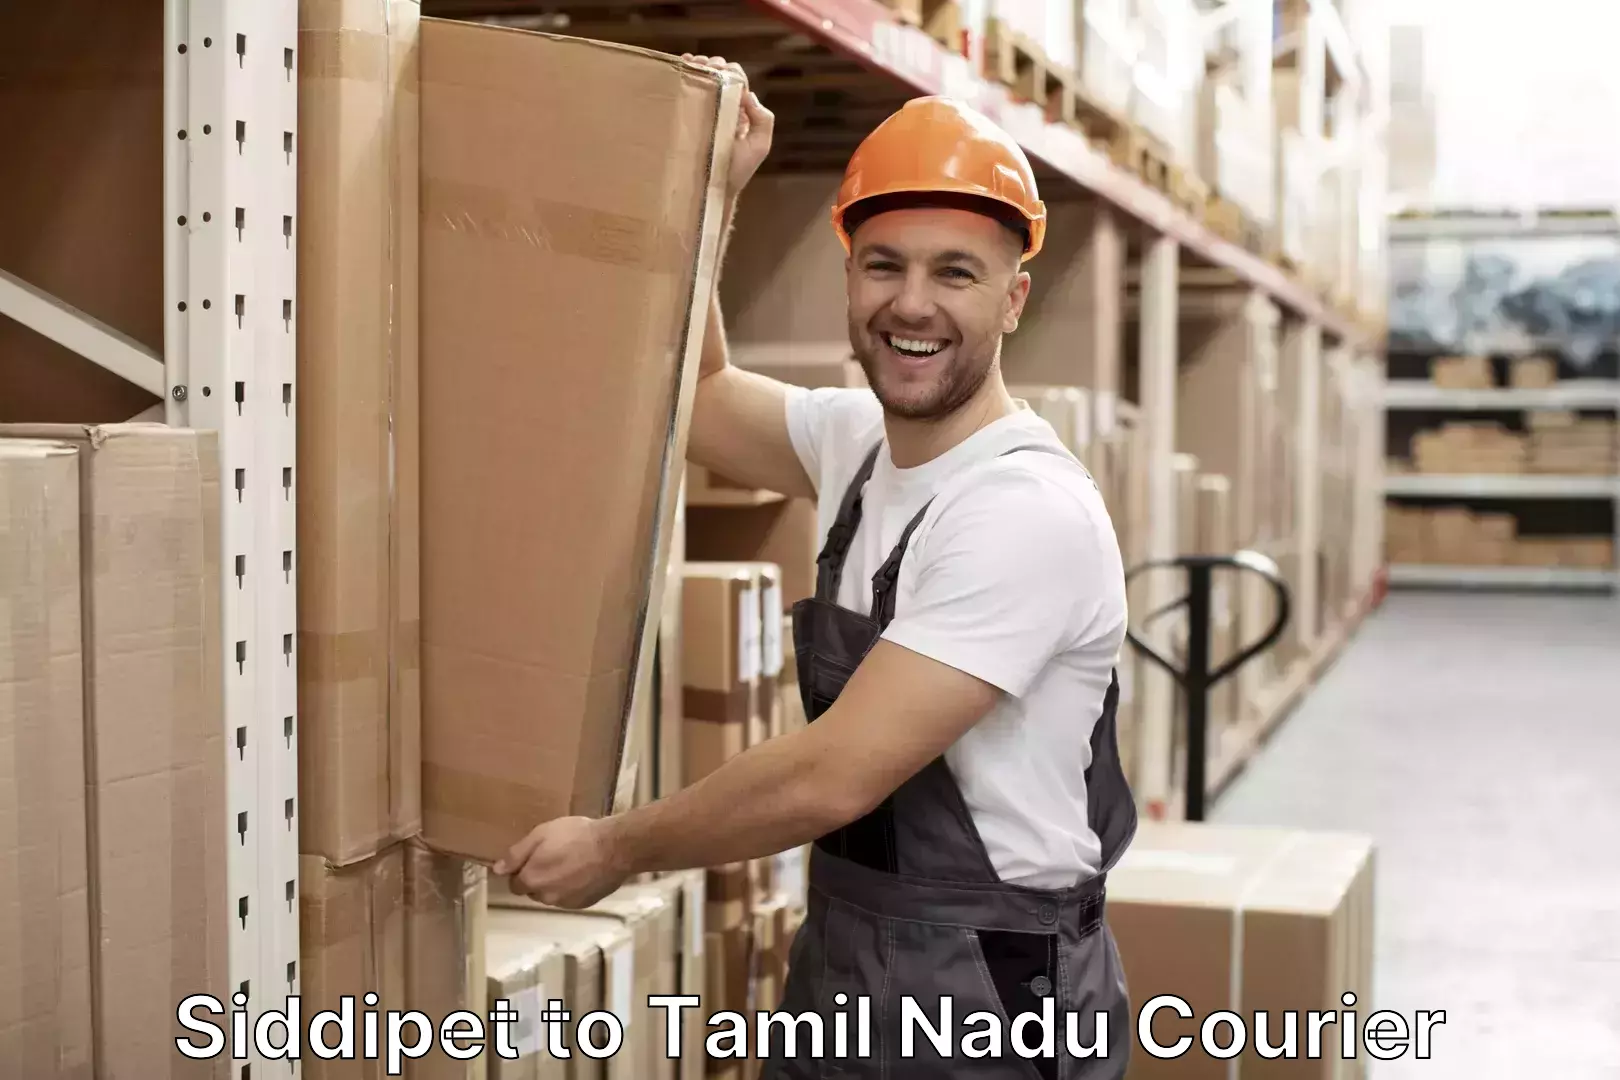 Luggage transport consulting Siddipet to Tuticorin Port